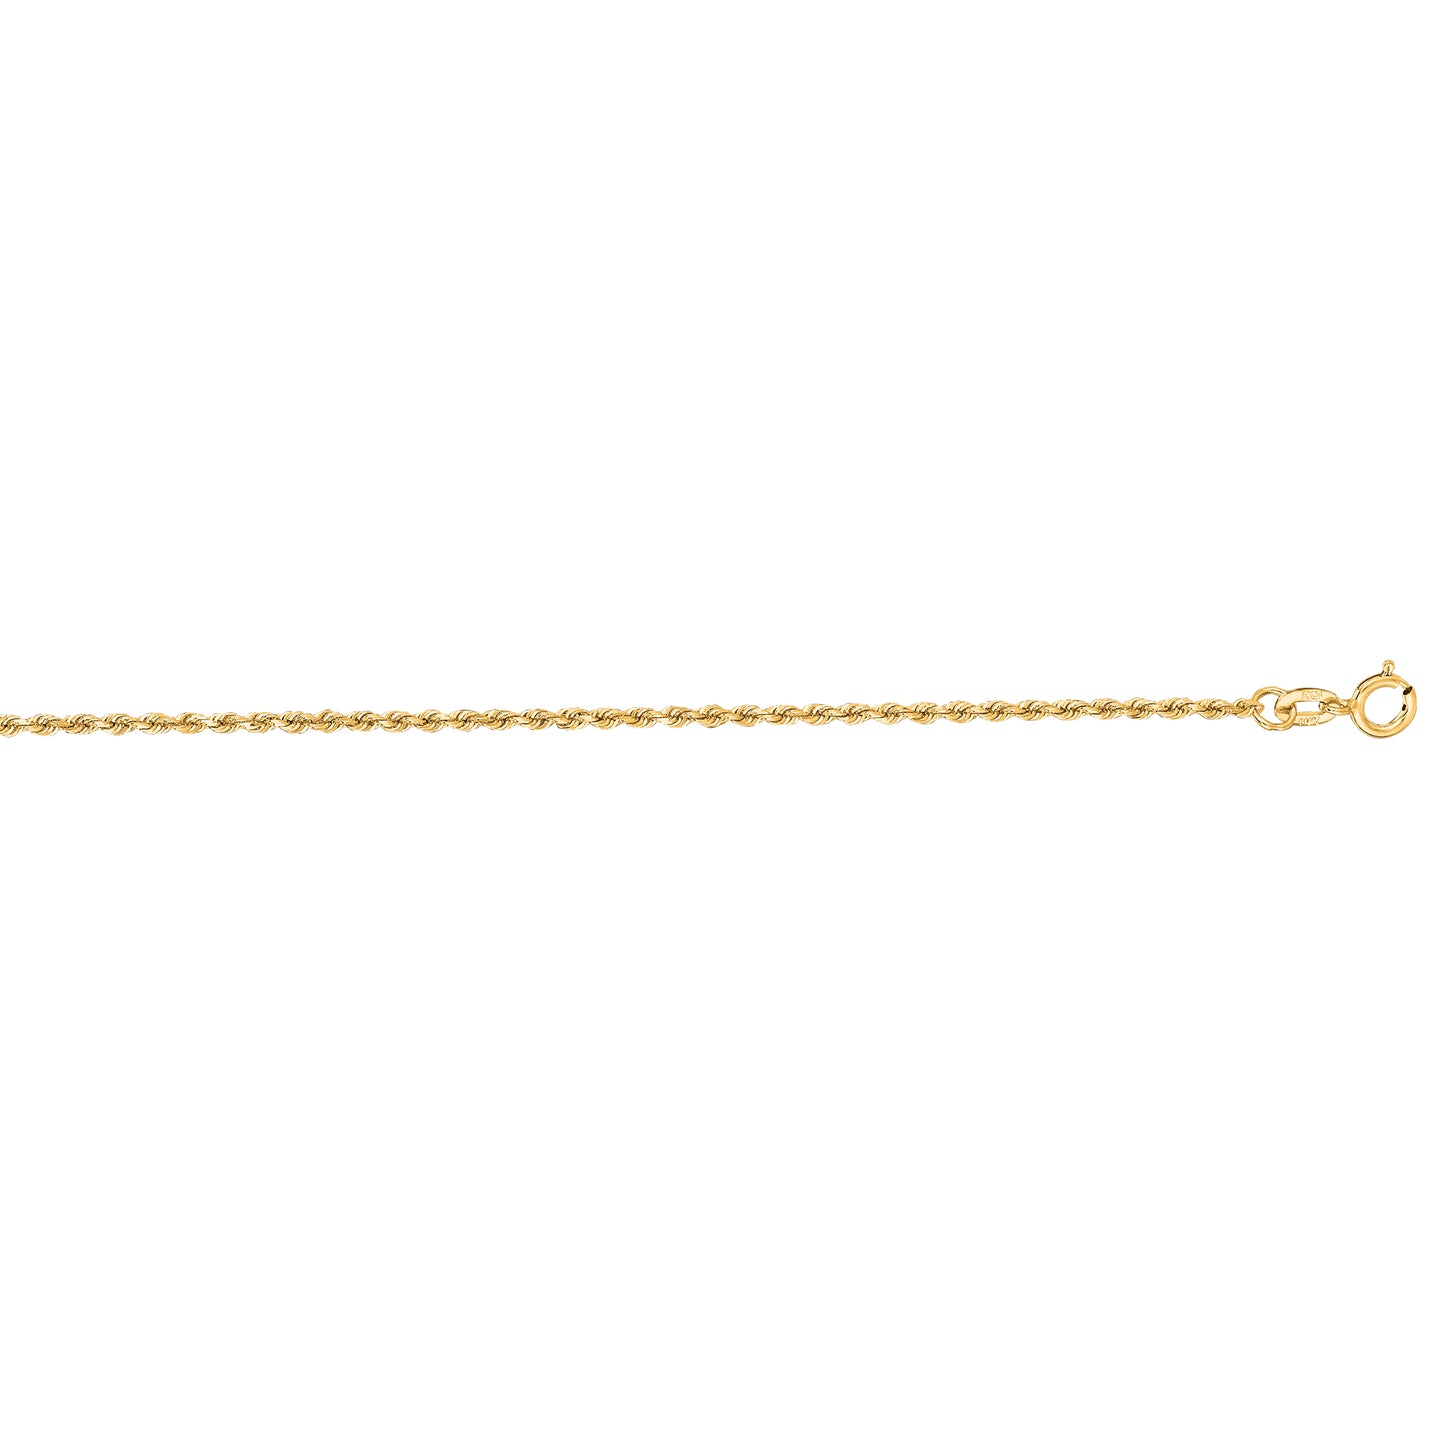 10K Gold 1.4mm Solid Diamond Cut Royal Rope Chain